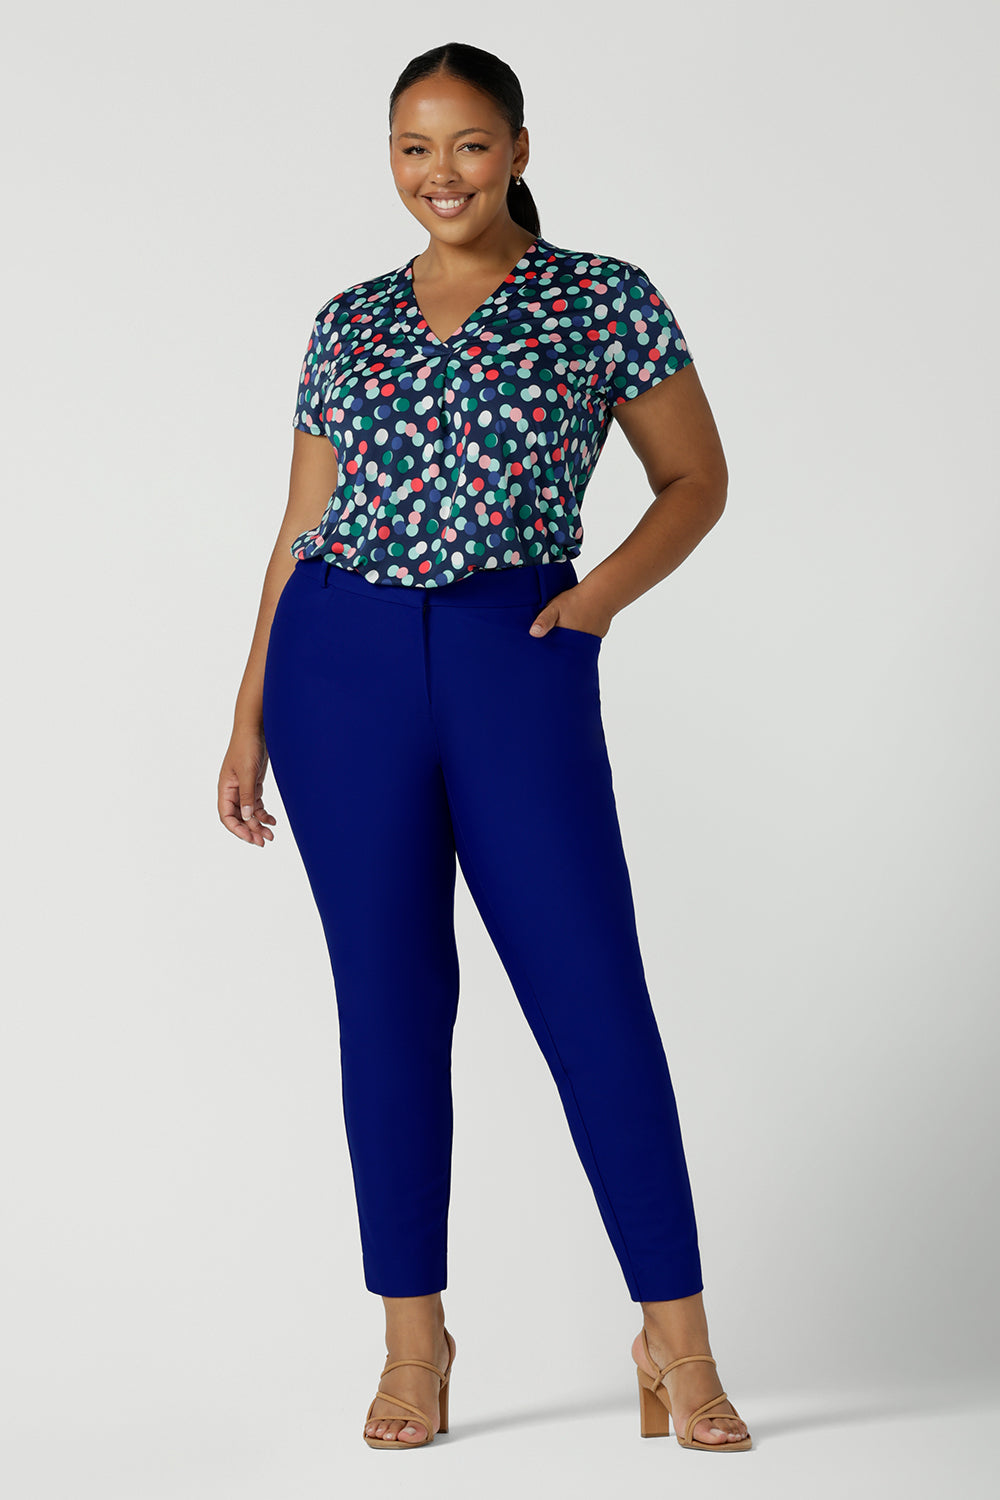 A plus size, size 18 woman wears a short sleeve, V-neck top in dot print slinky jersey fabric. Worn with cobalt blue tailored trousers, this women's top is a good top for plus size women's workwear with personality! Made in Australia and available to shop online in sizes 8 to 24.